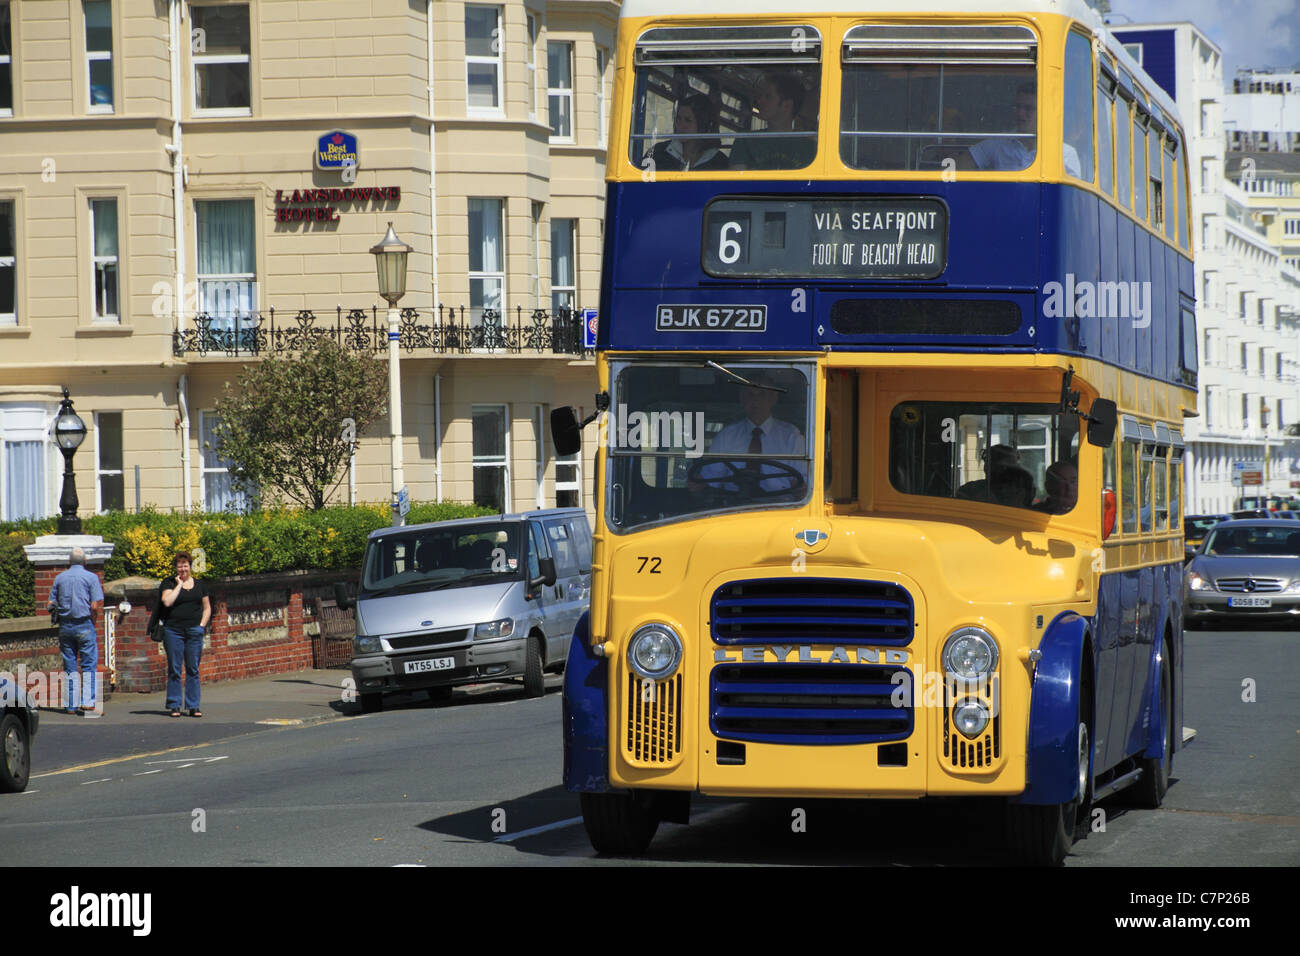 An old vintage British Leyland Bus in Eastbourne Buses livery at Eastbourne, East Sussex, England. Stock Photo